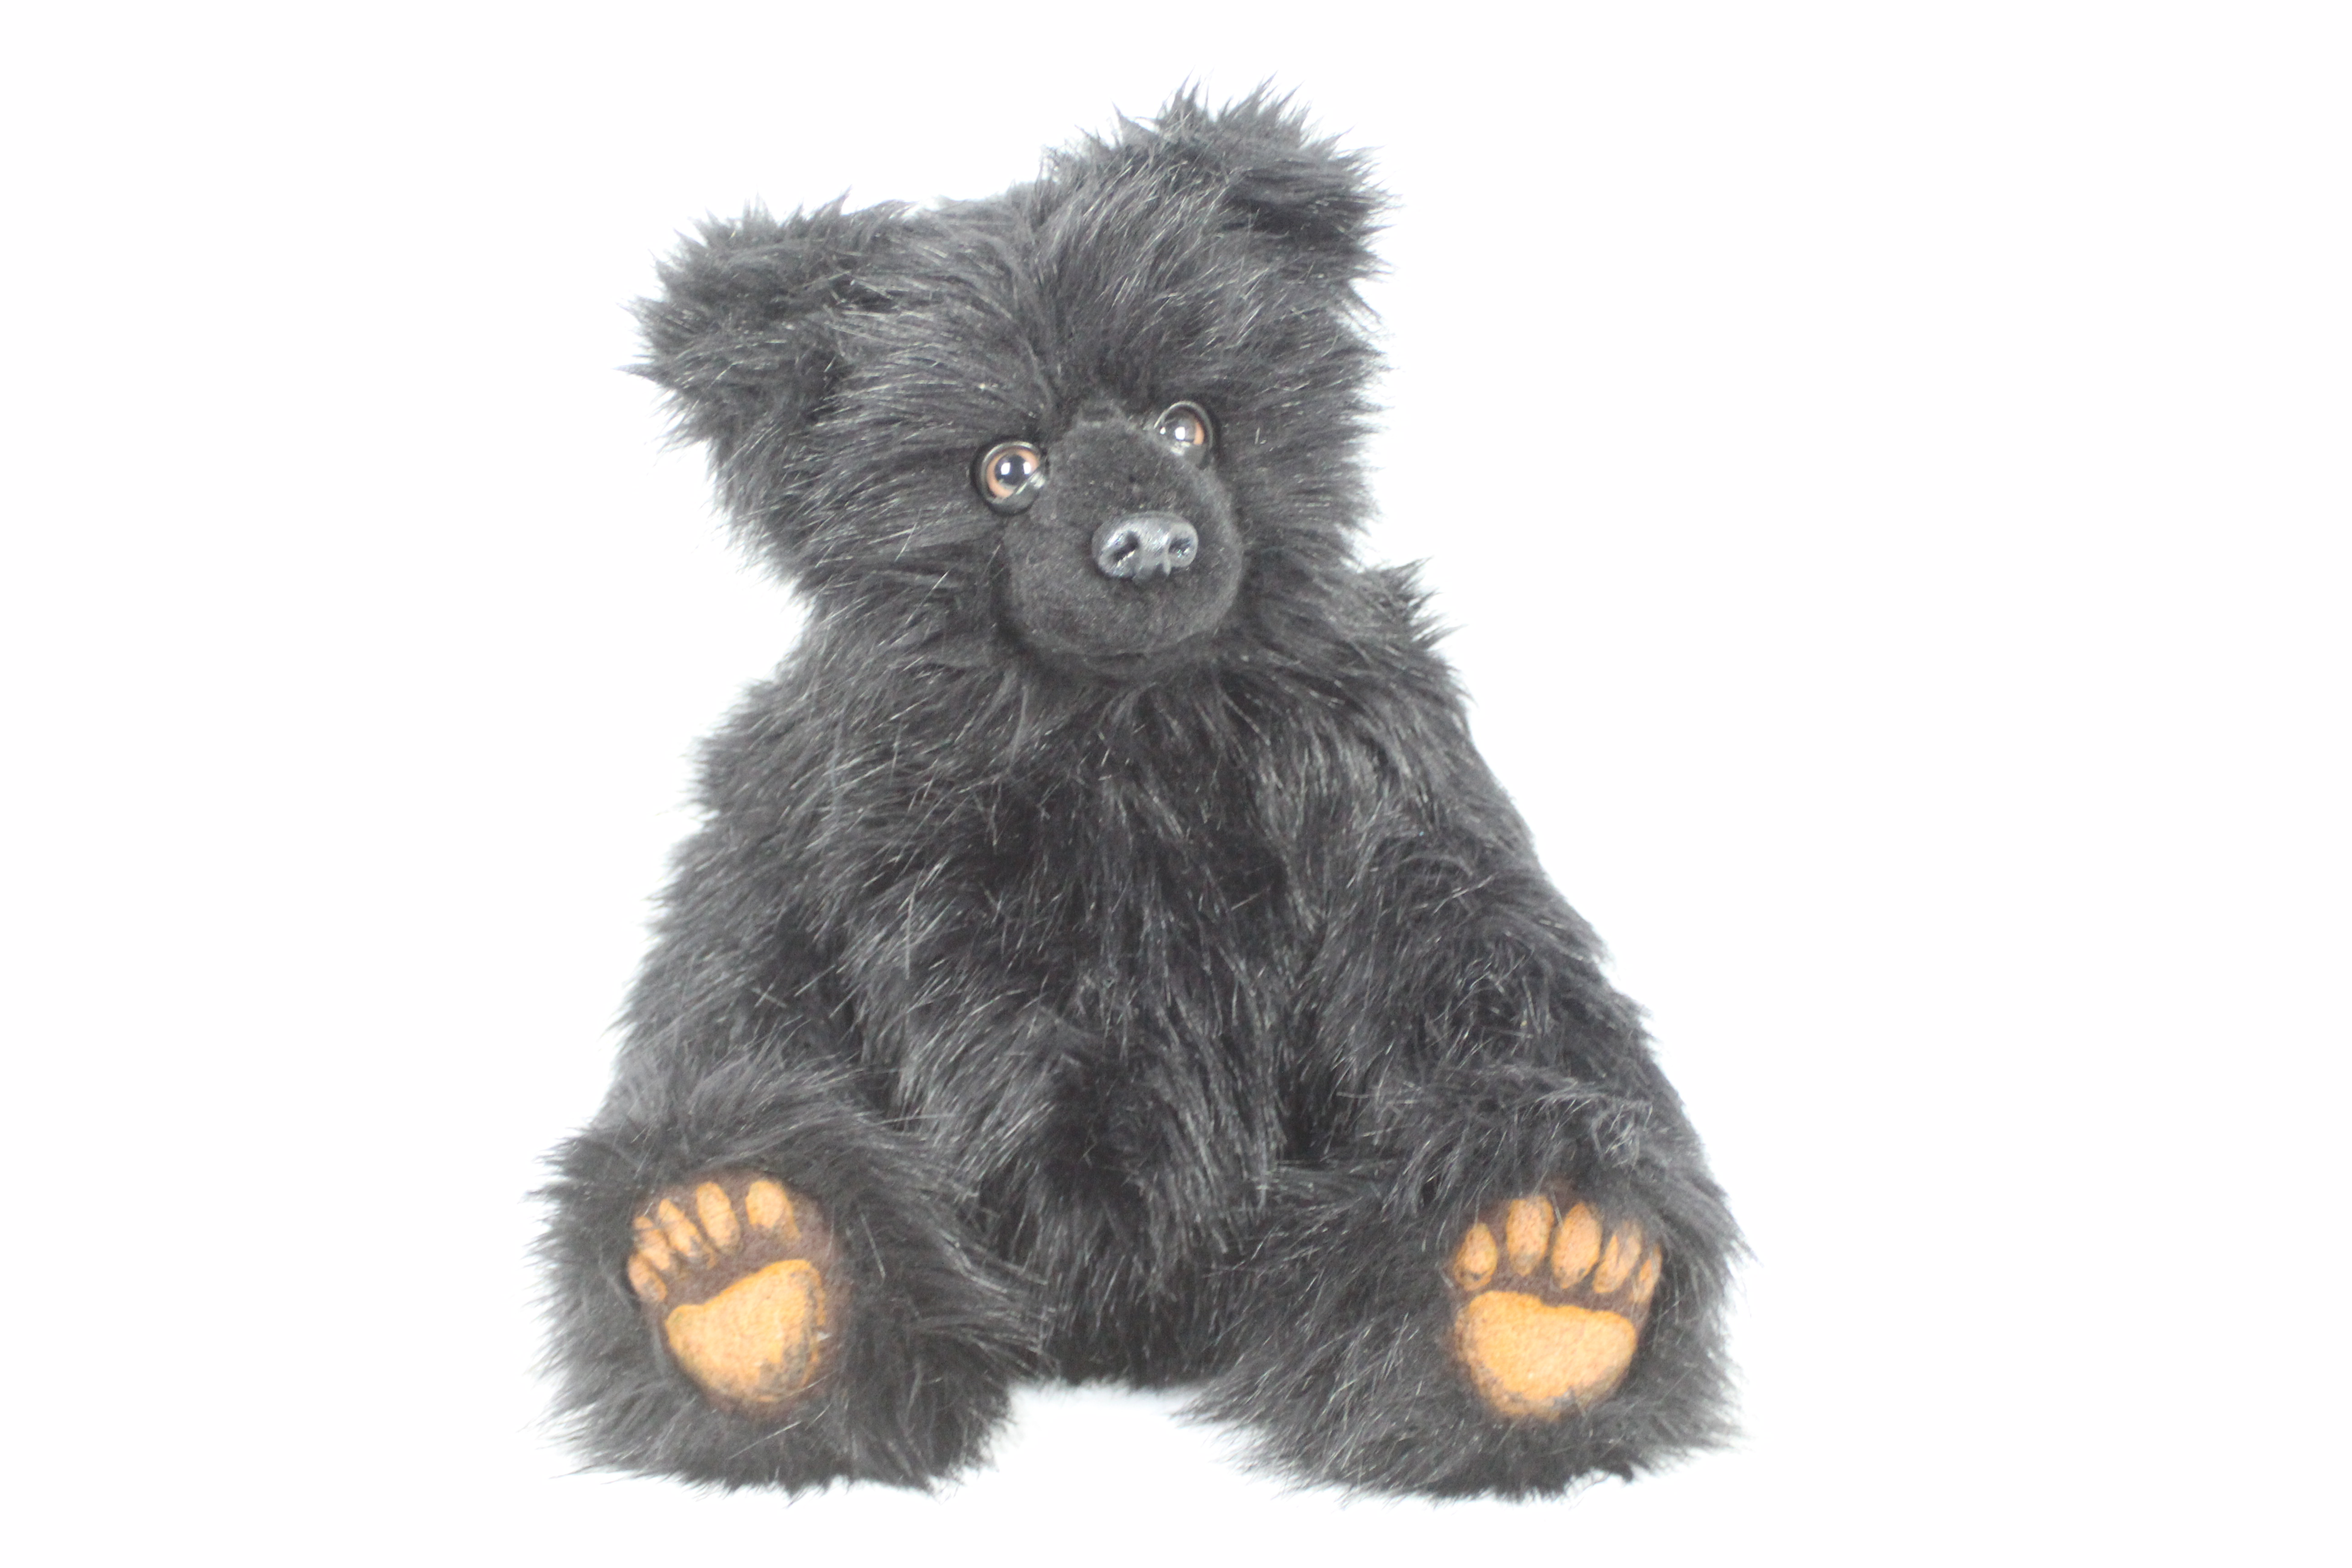 Unknown Maker - A long haired jointed black bear with no makers label visible, - Image 2 of 3